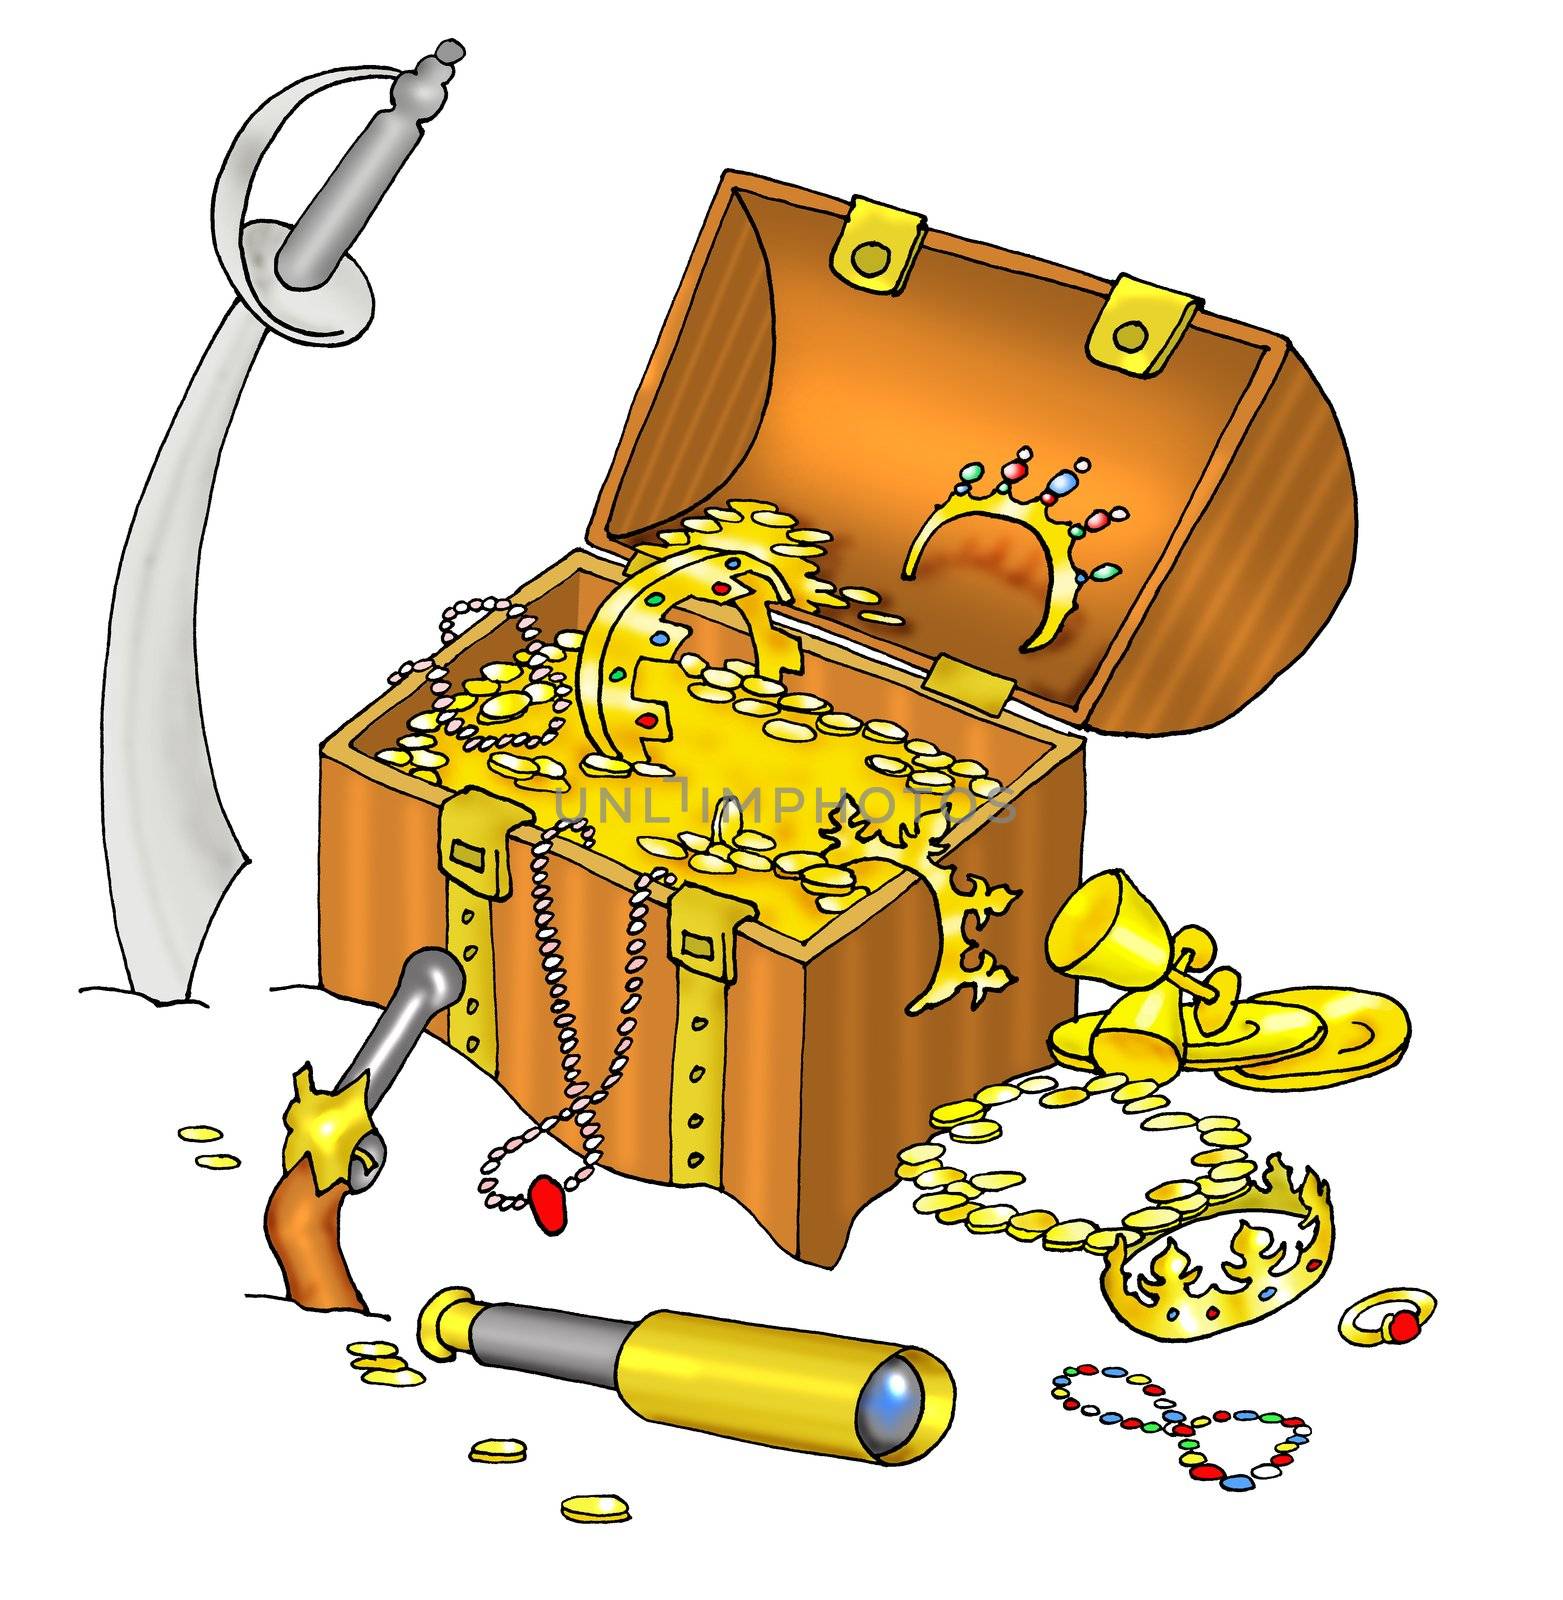 Pirate's treasure chest illustration with gold coins by acremead